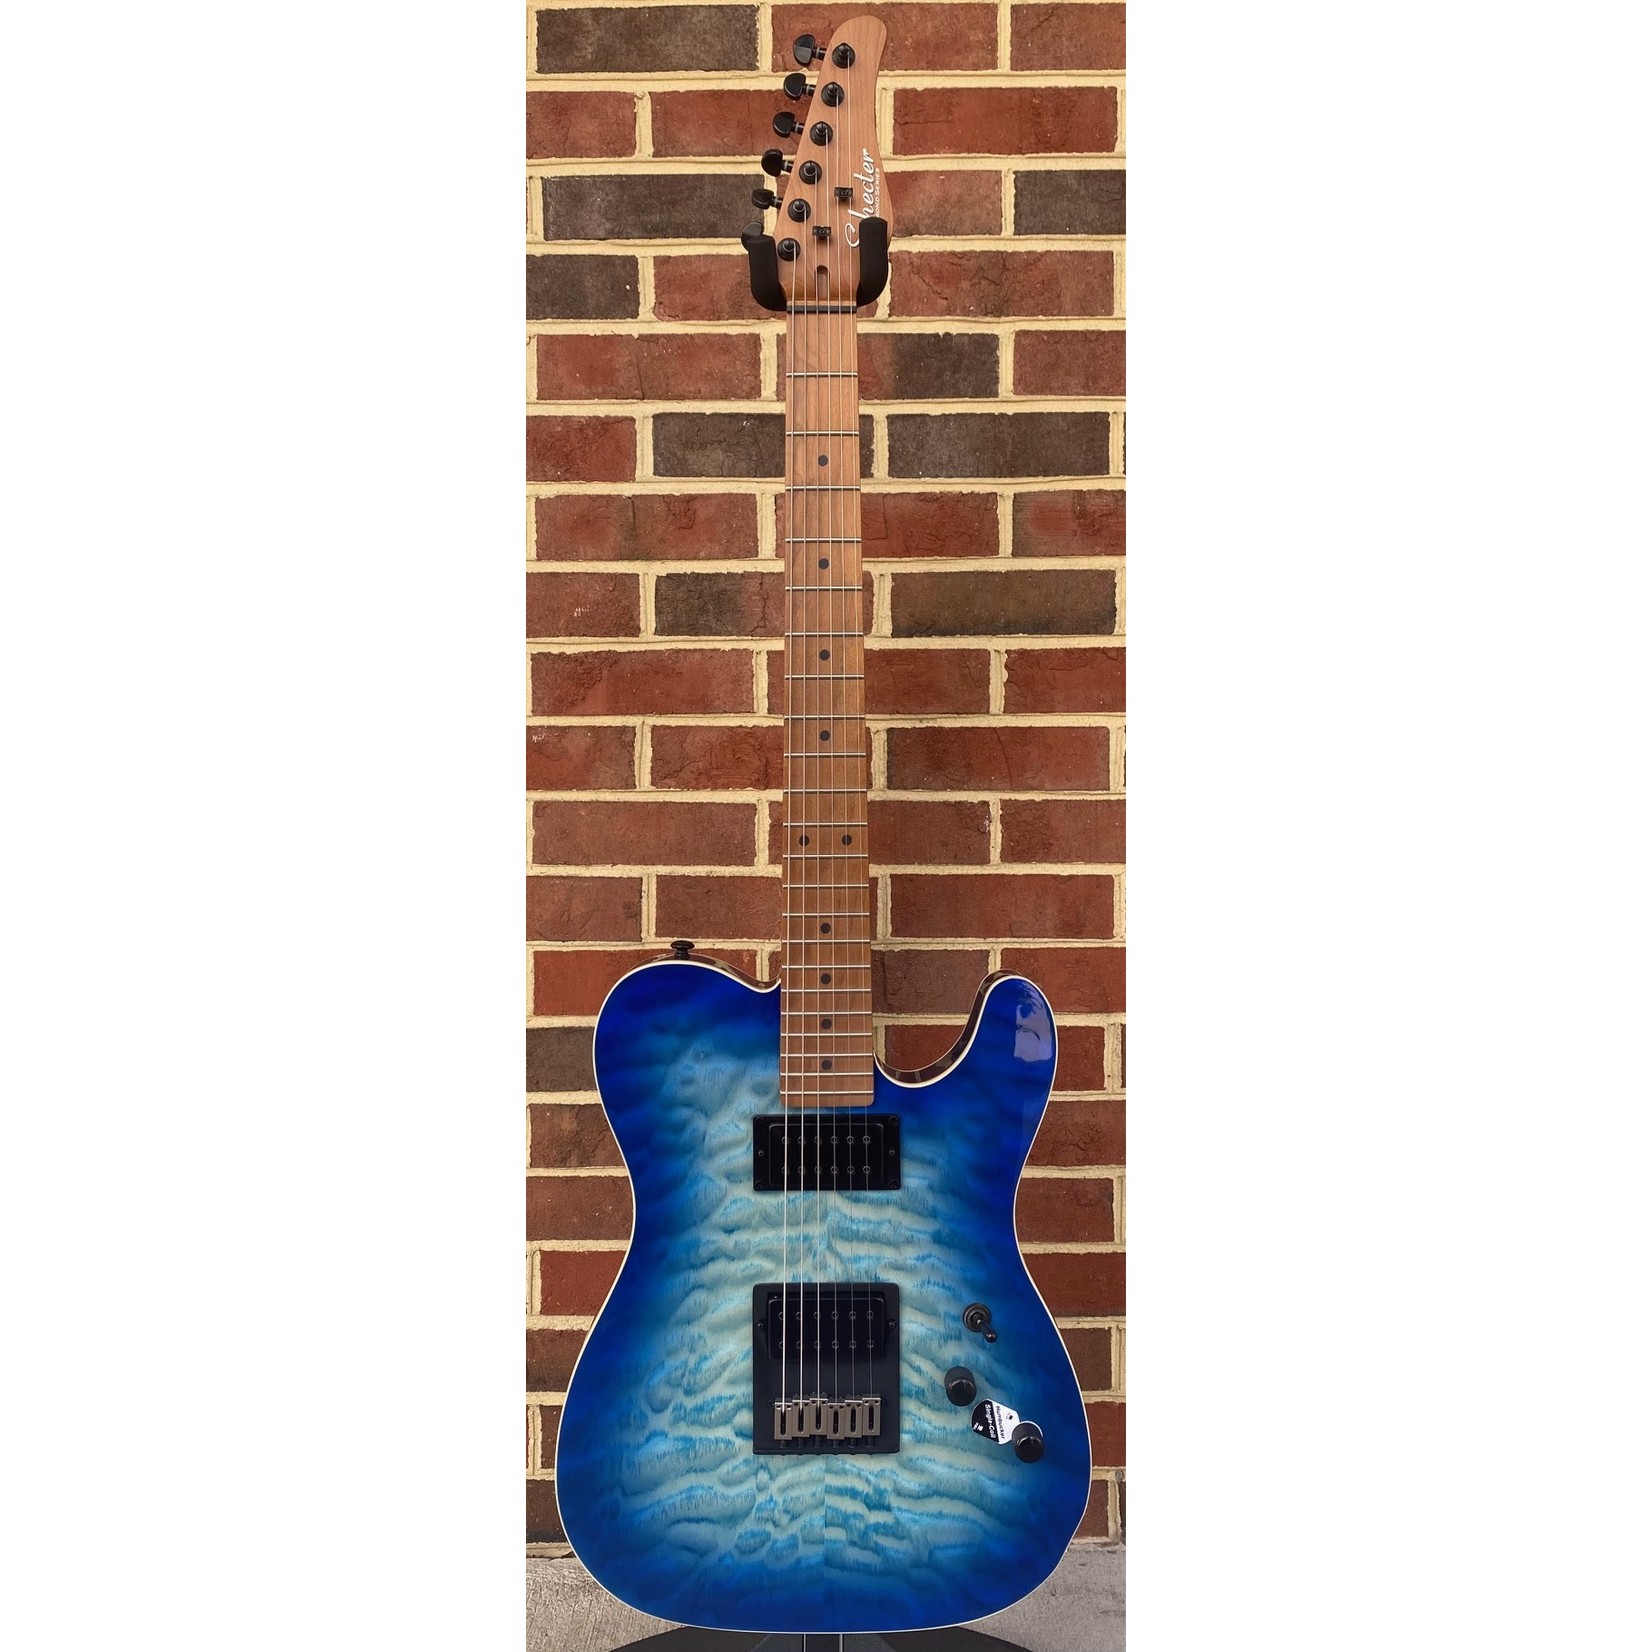 Schecter Guitar Research Schecter PT Pro, Trans Blue Burst, Roasted Maple Neck, Locking Tuners